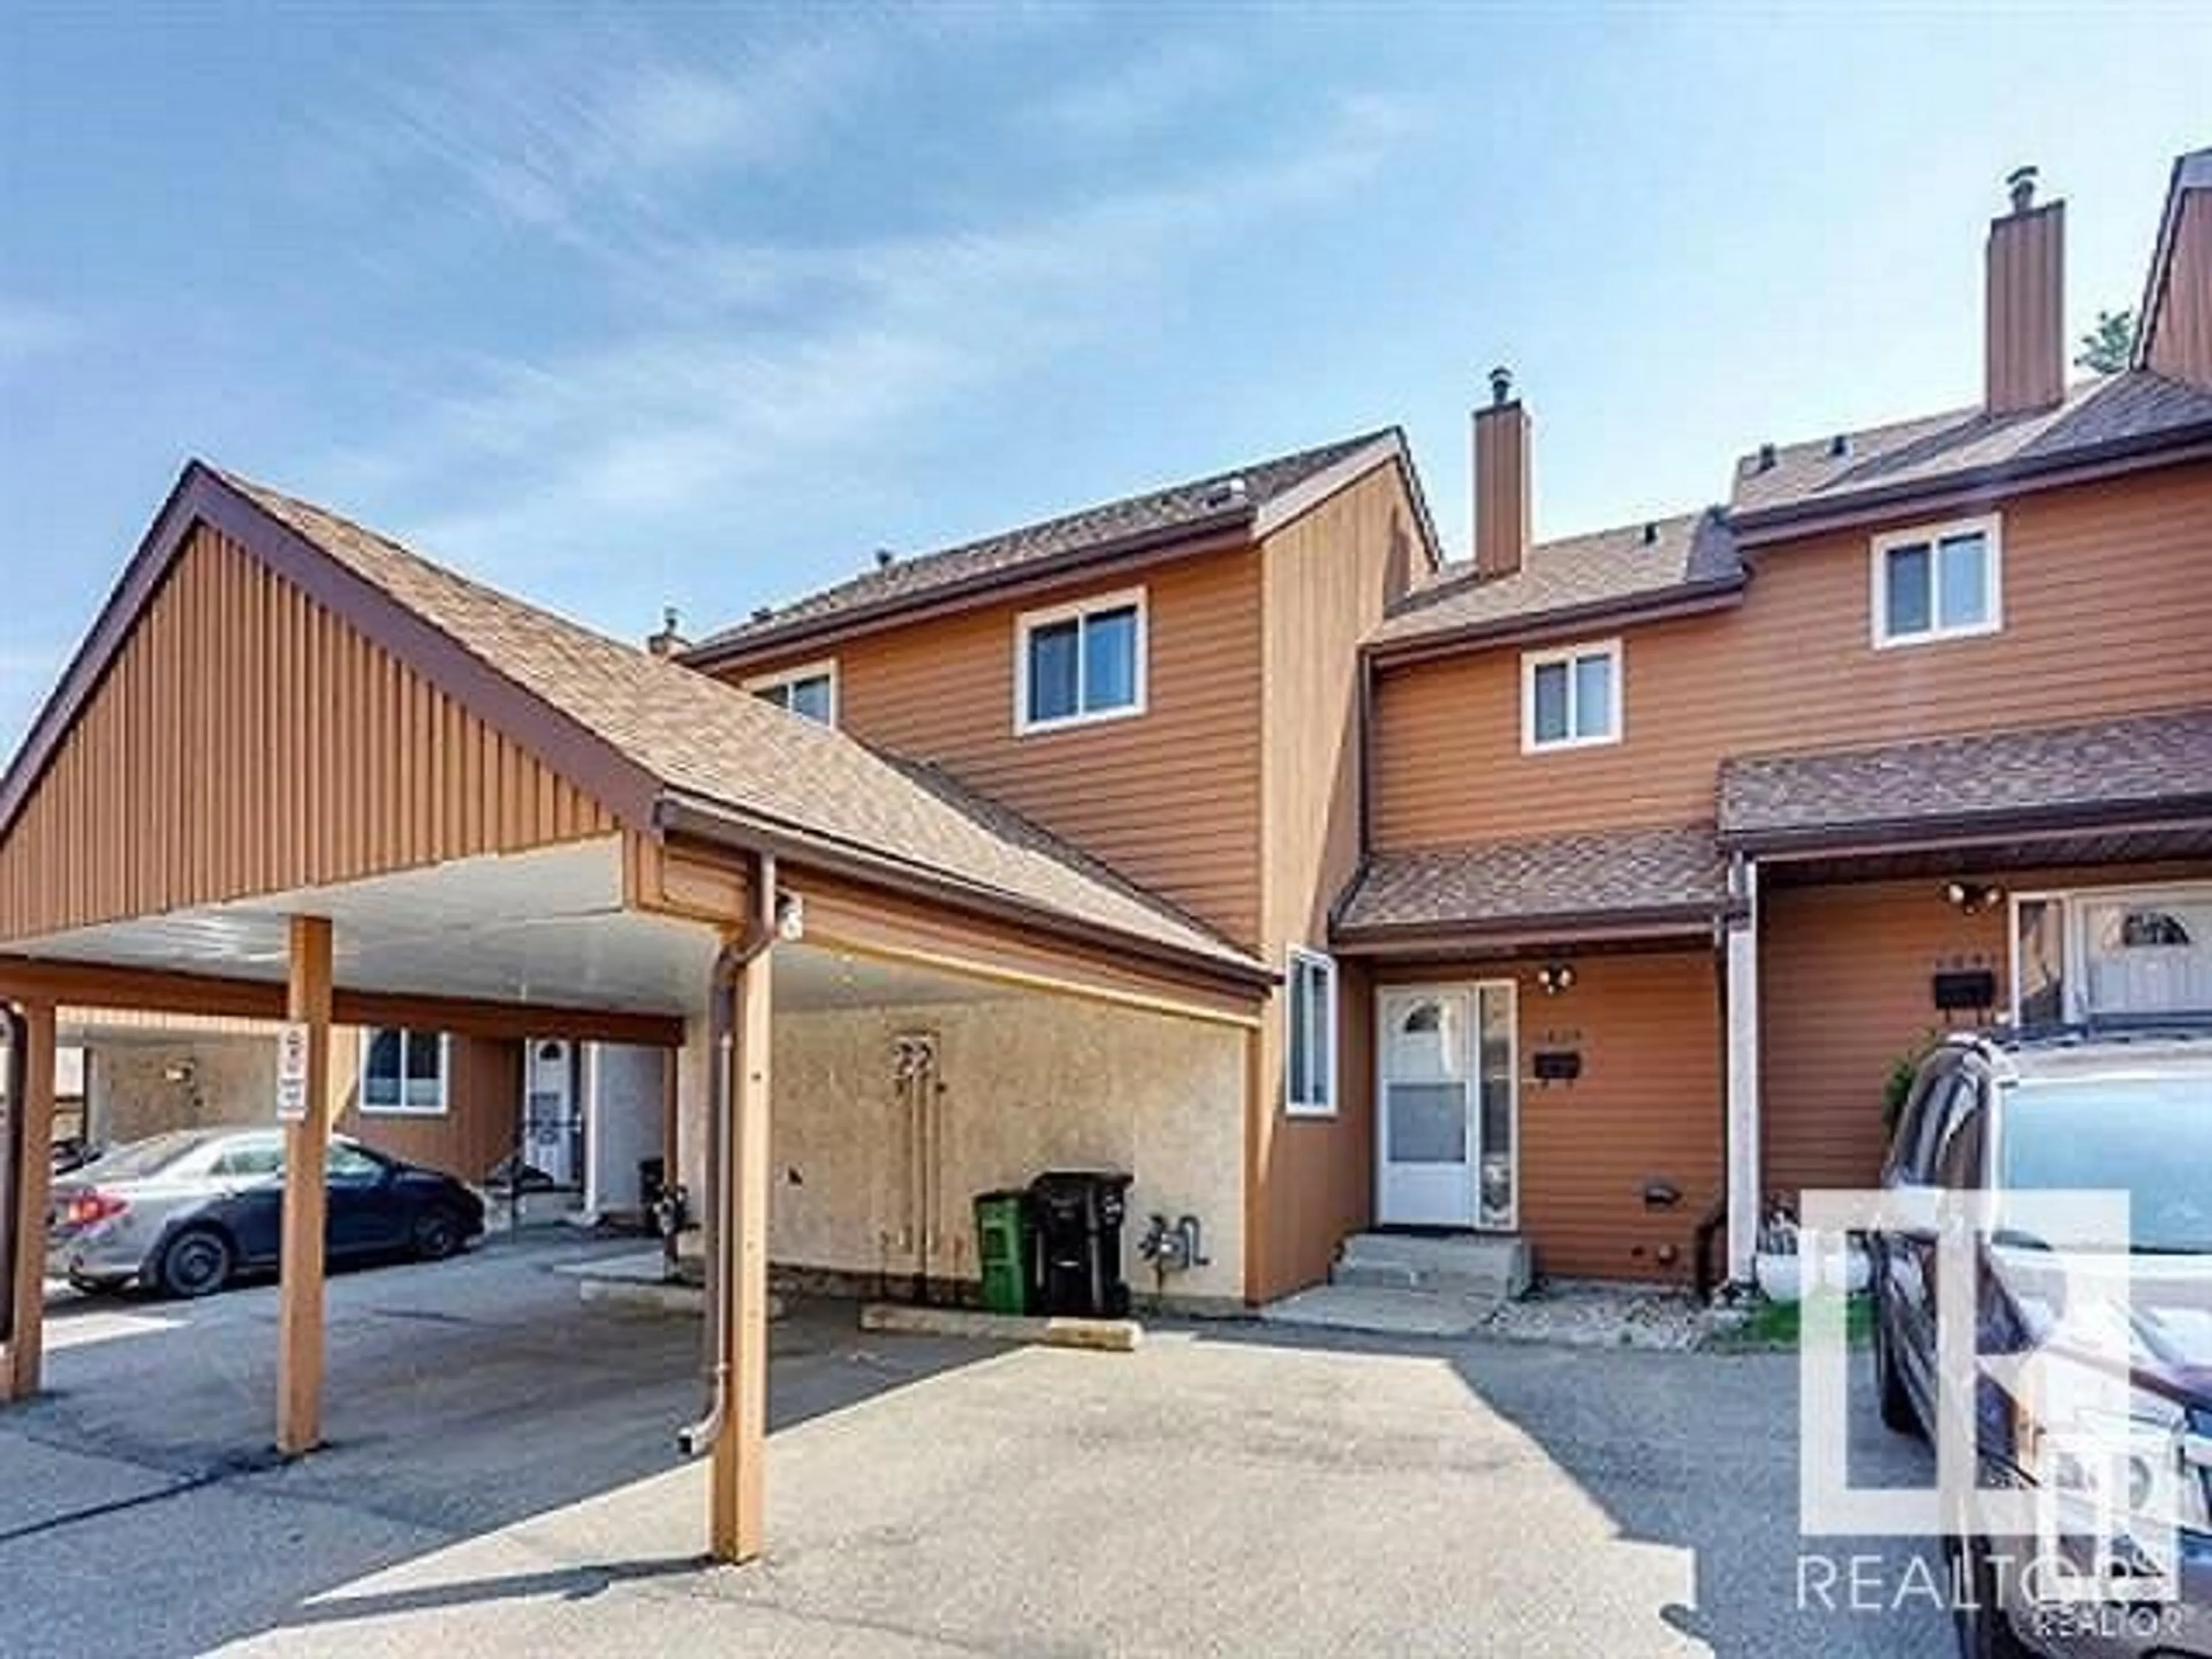 A pic from exterior of the house or condo for 18629 66 AV NW NW, Edmonton Alberta T5T2M3